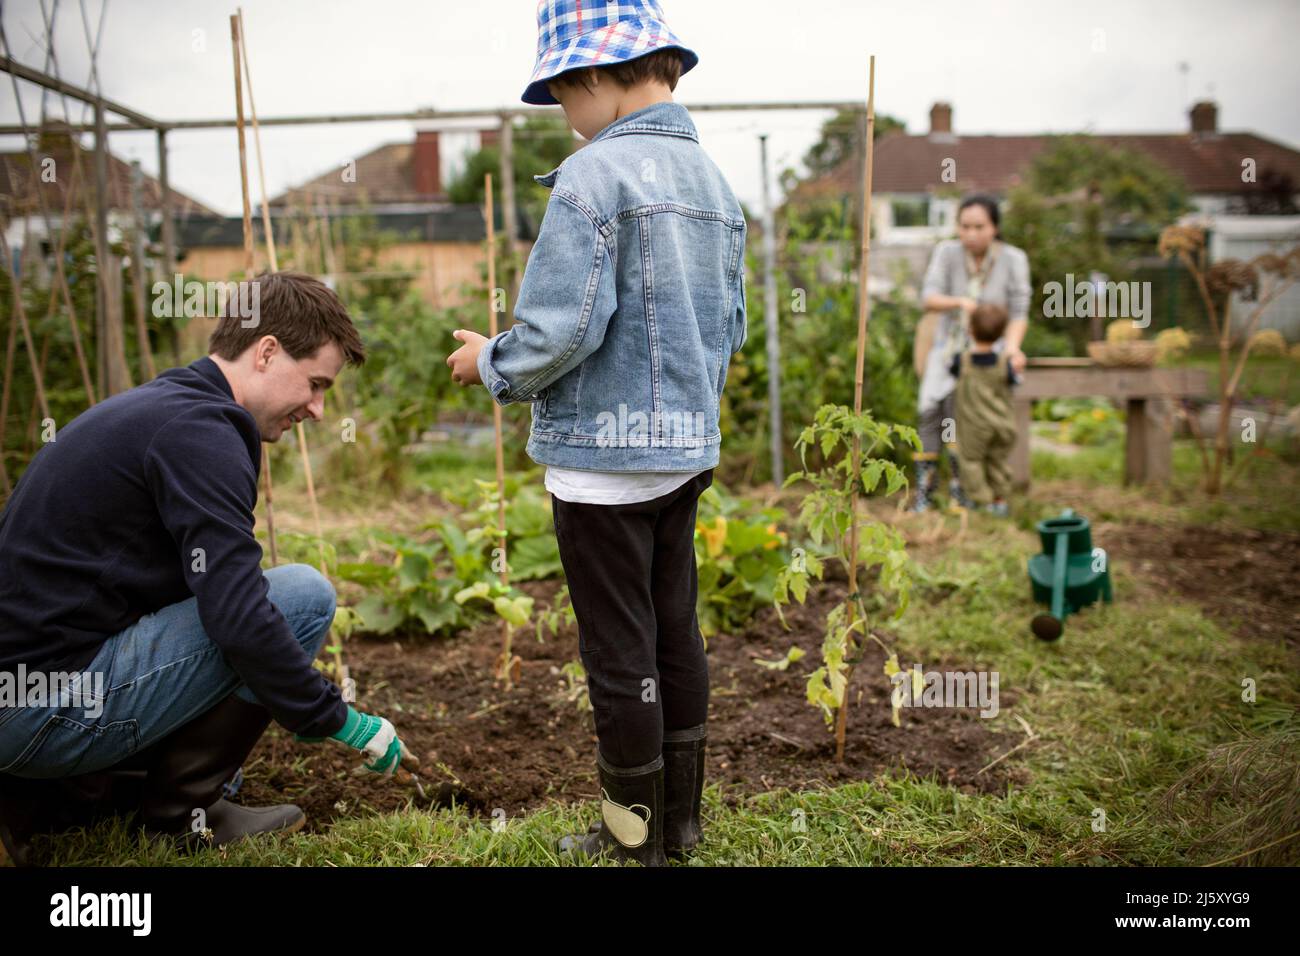 Father and son digging in garden Stock Photo